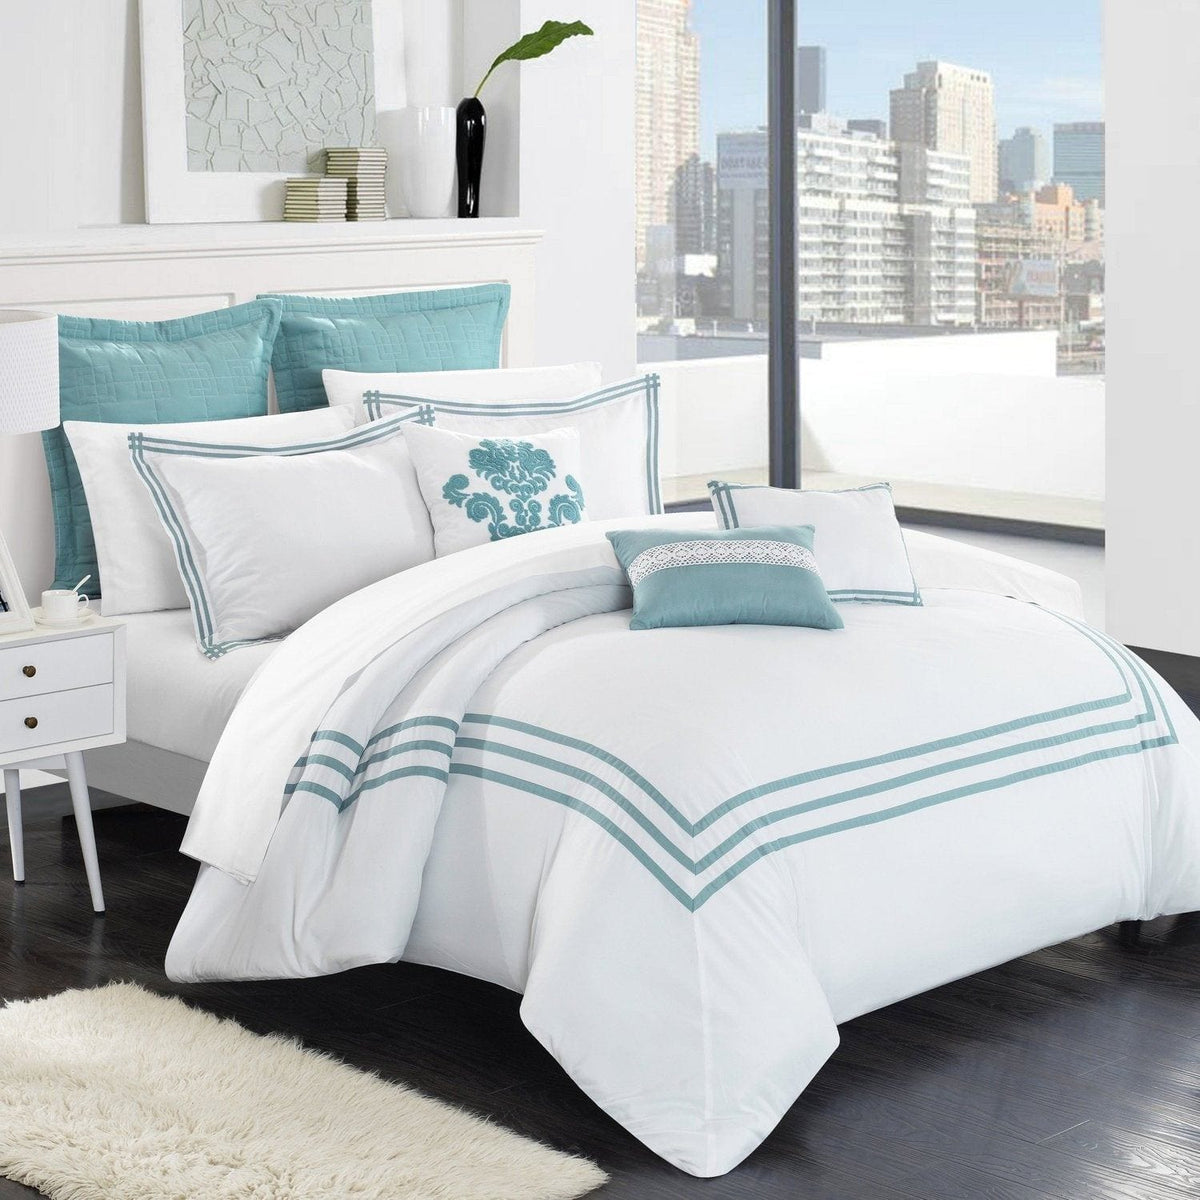 Chic Home Cosmo 8 Piece Hotel Comforter Set 